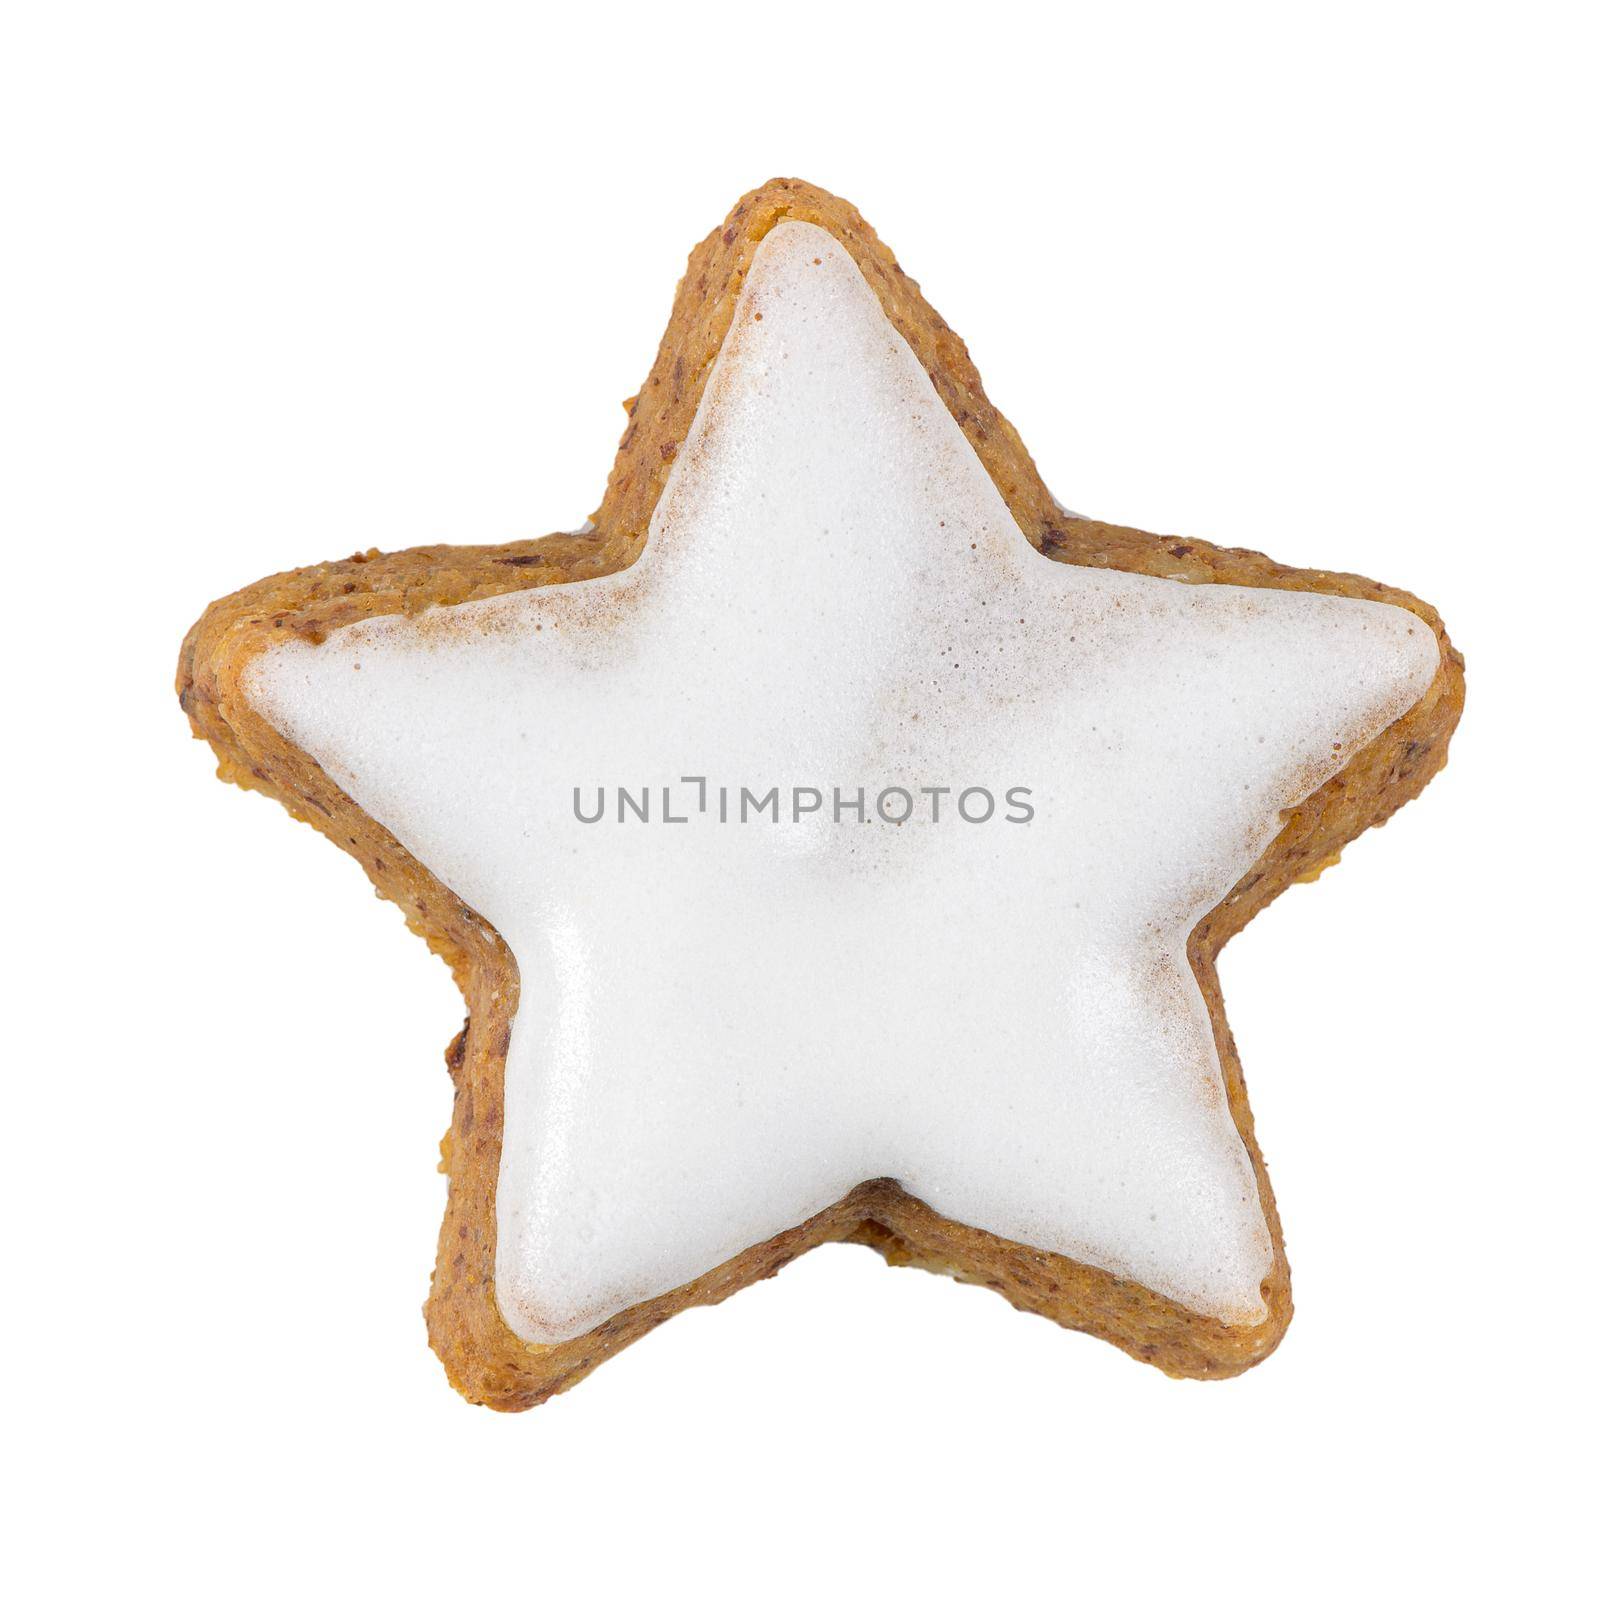 Cinnamon Star biscuit isolated on white background.